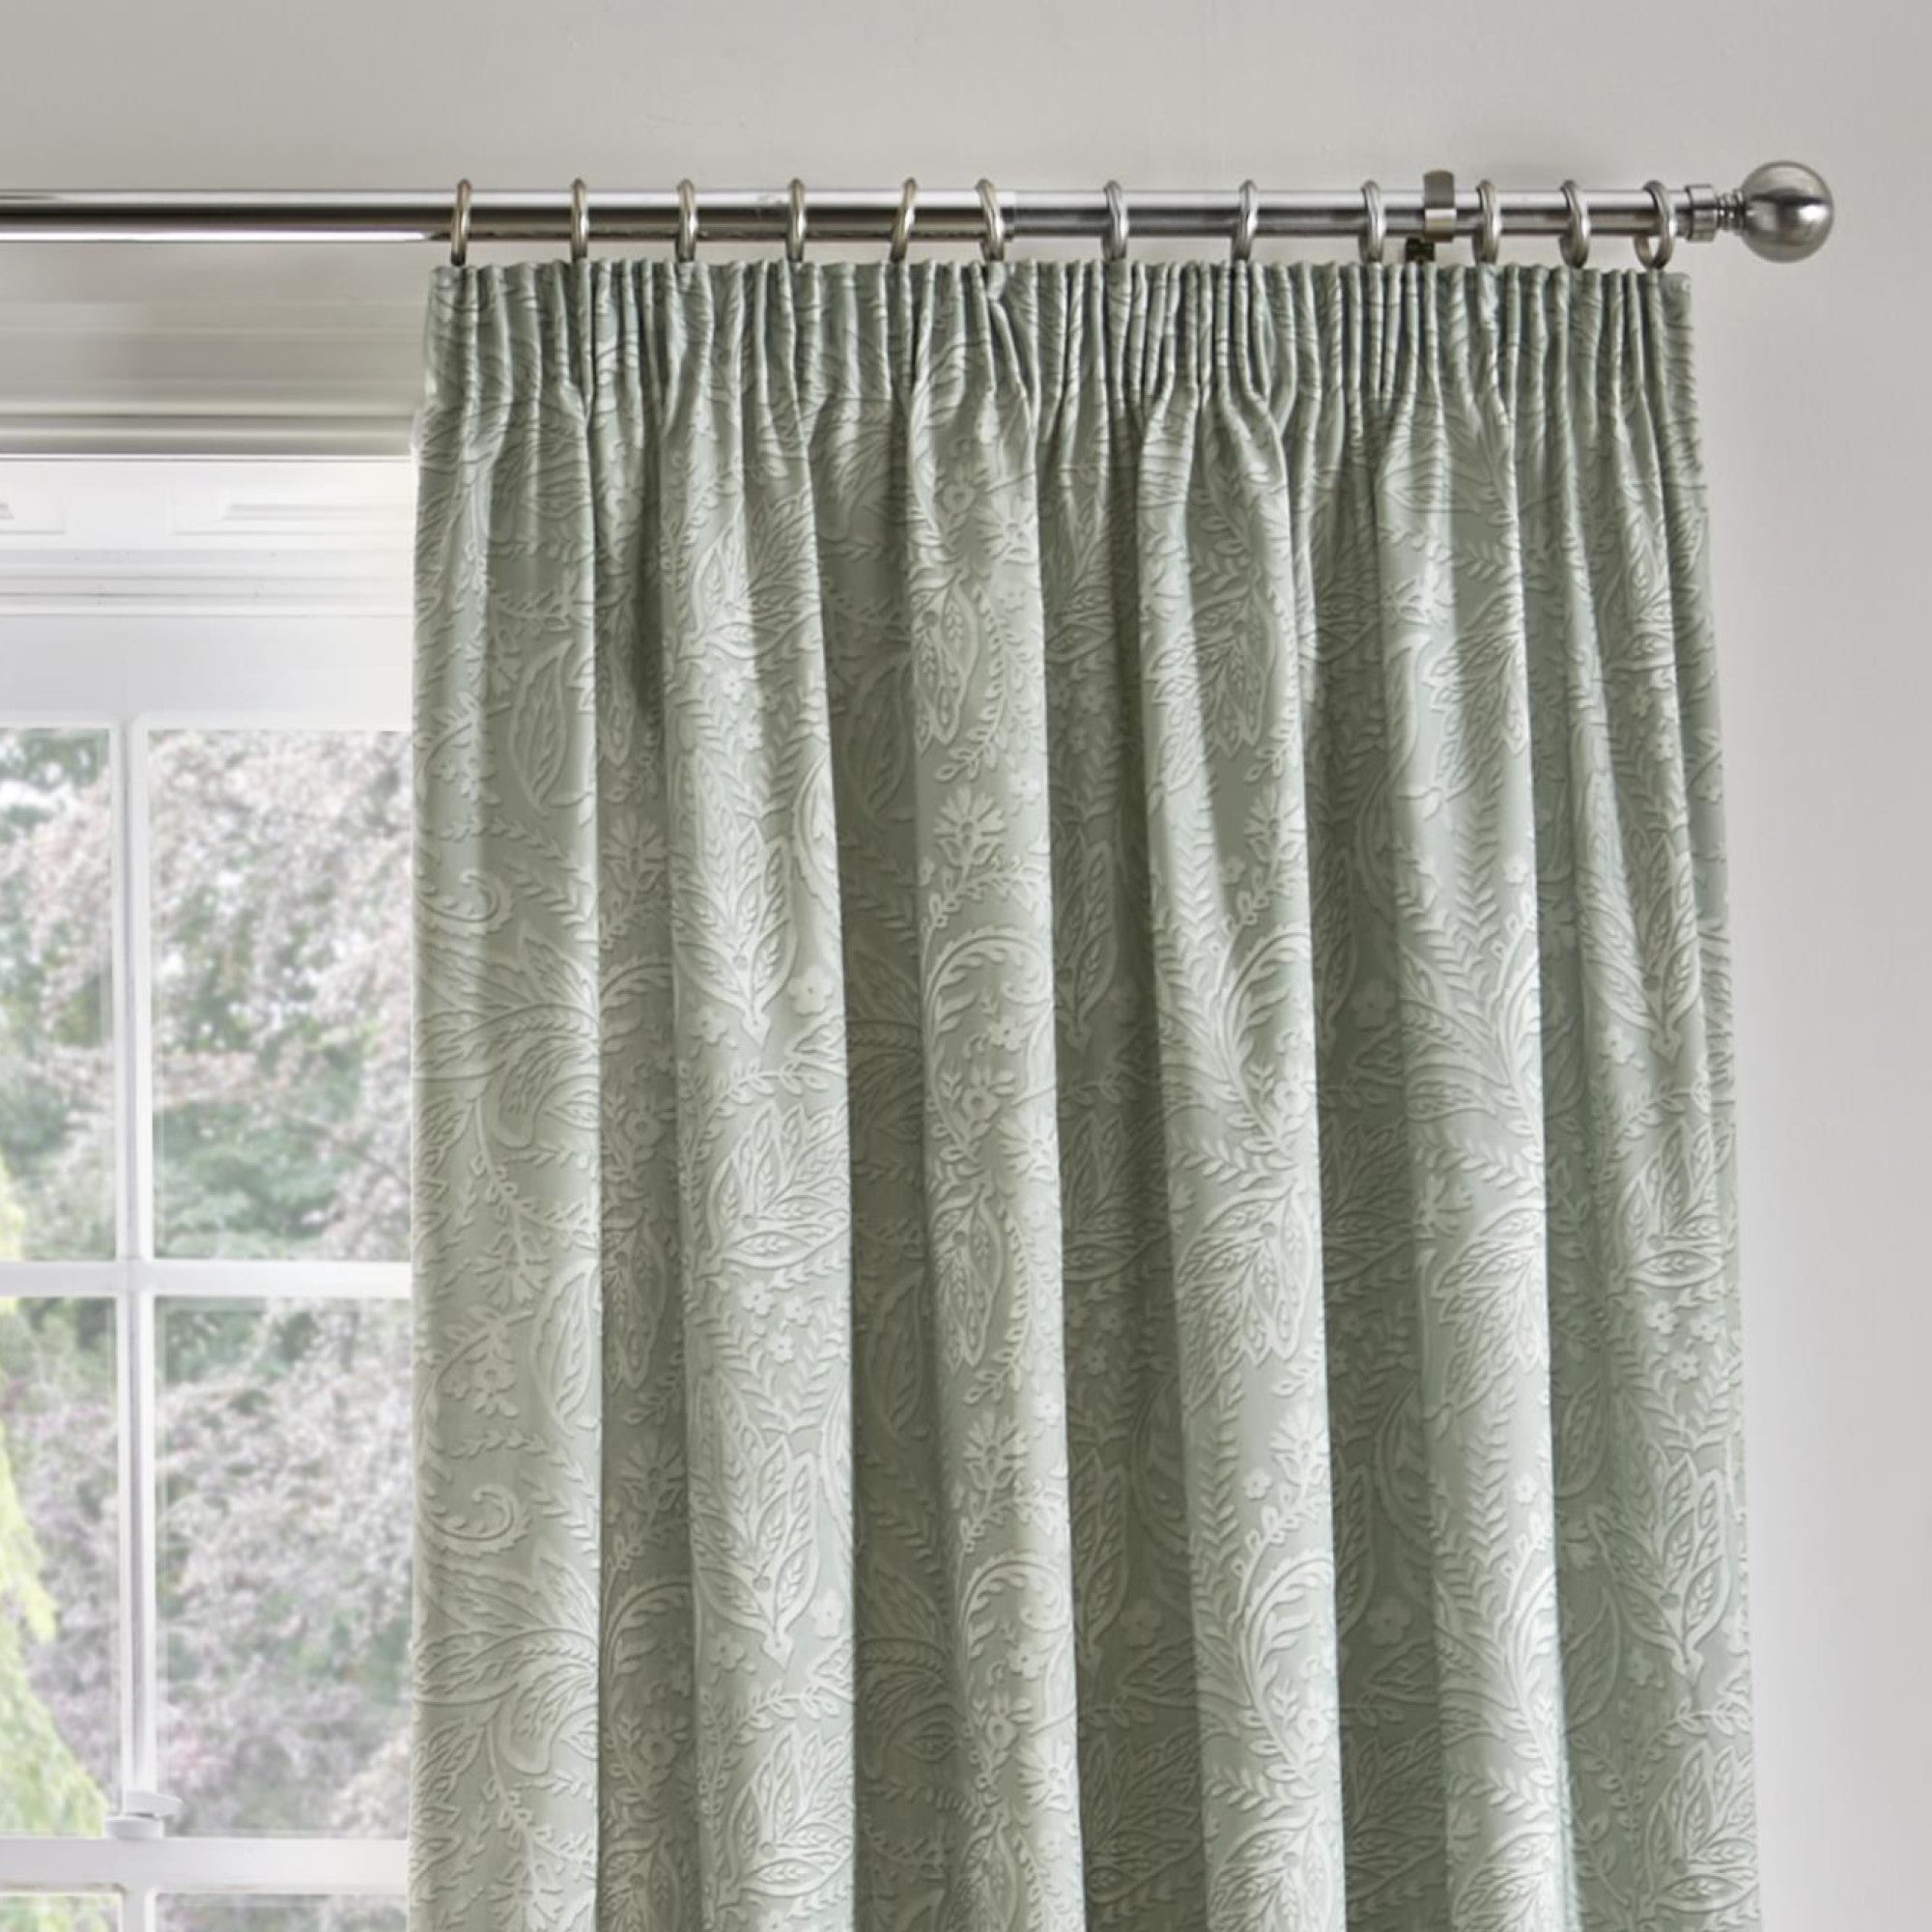 Pair of Pencil Pleat Curtains With Tie-Backs Aveline by D&D in Green